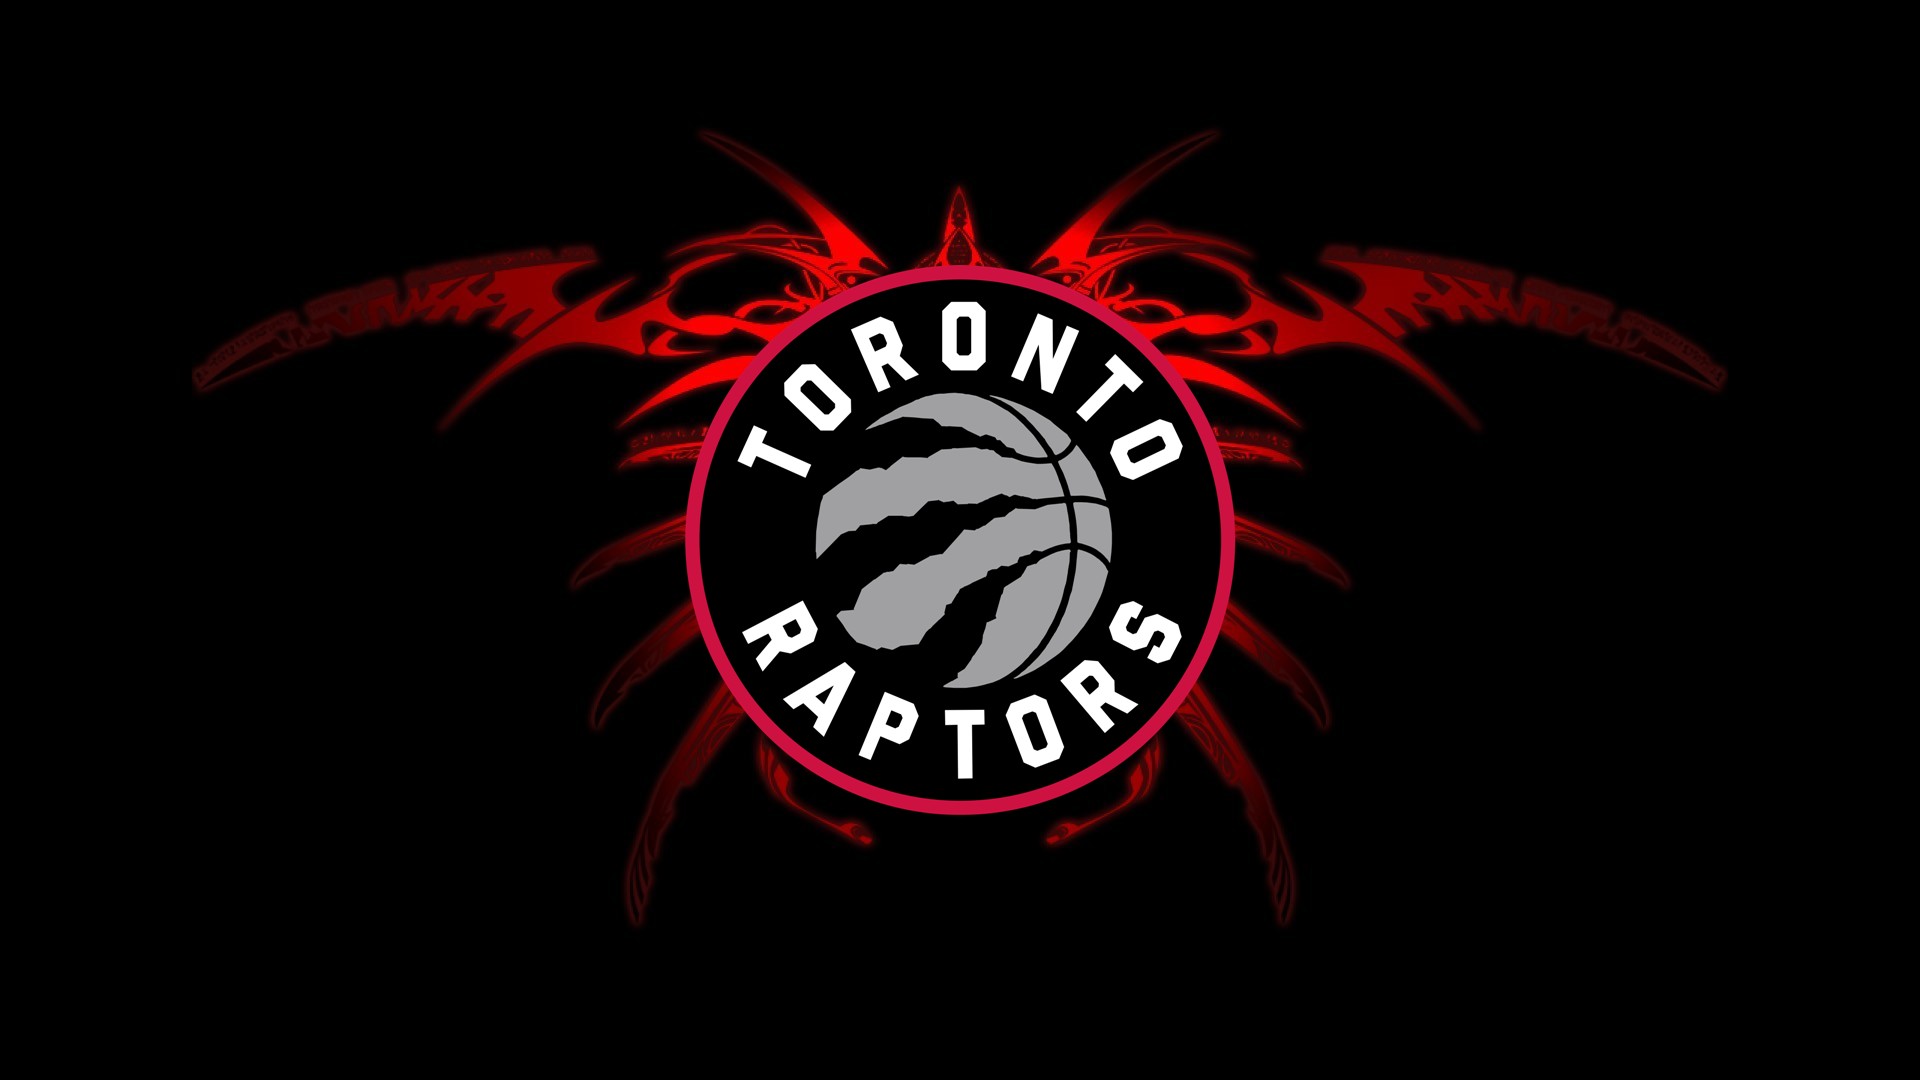 NBA Raptors Mac Backgrounds with image dimensions 1920x1080 pixel. You can make this wallpaper for your Desktop Computer Backgrounds, Windows or Mac Screensavers, iPhone Lock screen, Tablet or Android and another Mobile Phone device